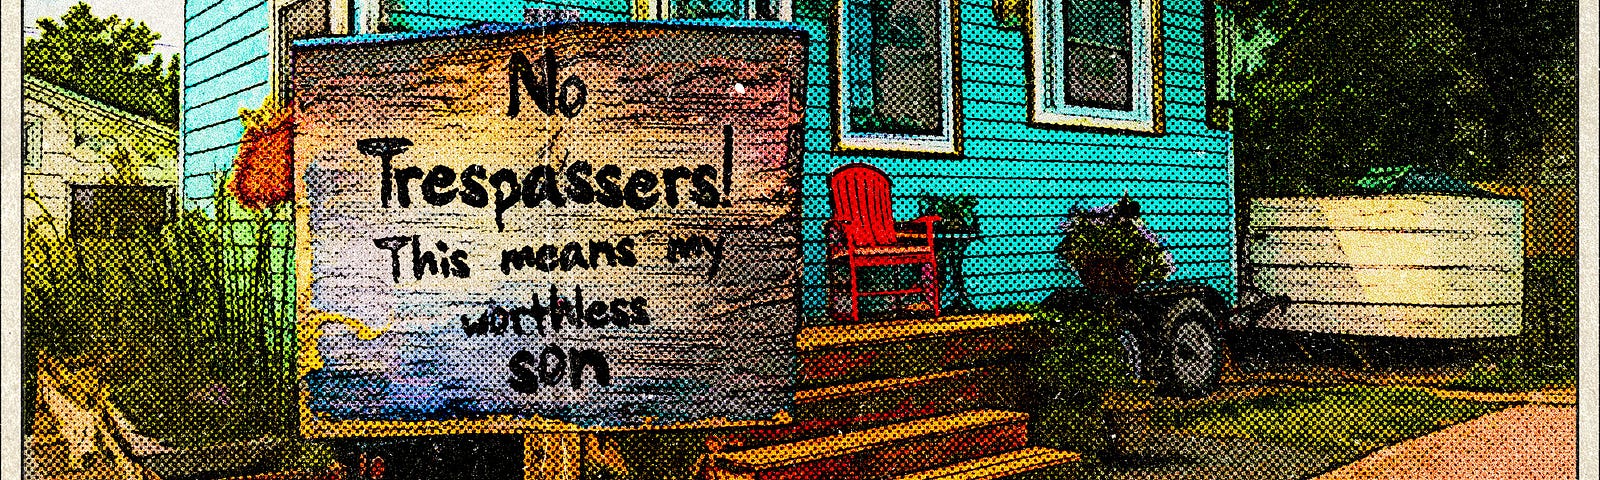 Trespassing sign in trailer home yard